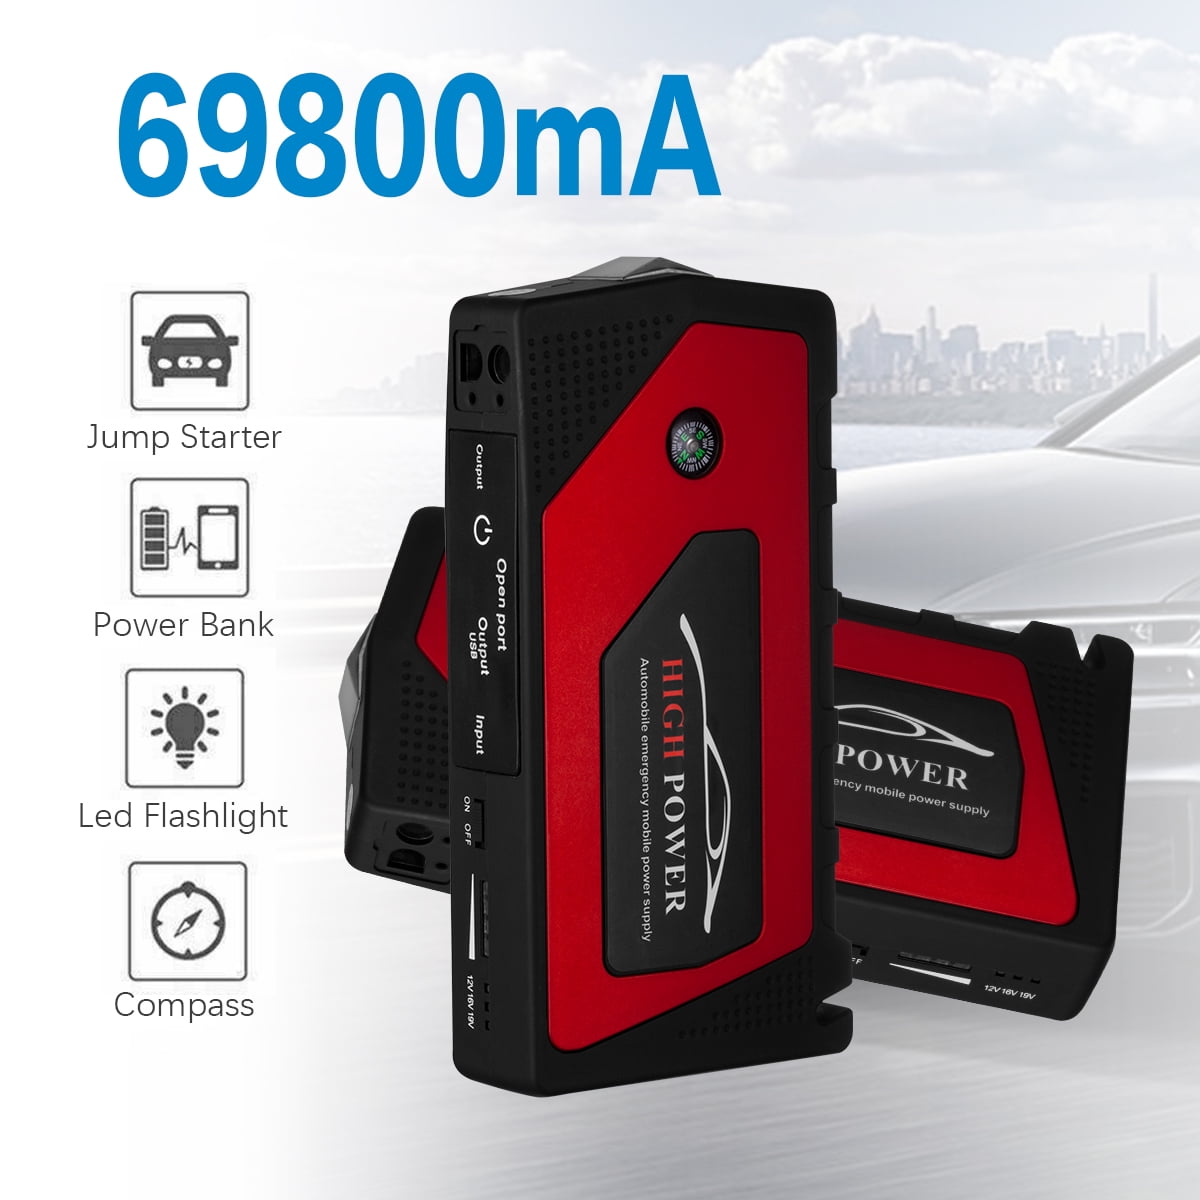 69800mAh 4USB Car Jump Starter Pack Booster Charger Battery Power Bank US STOCK 